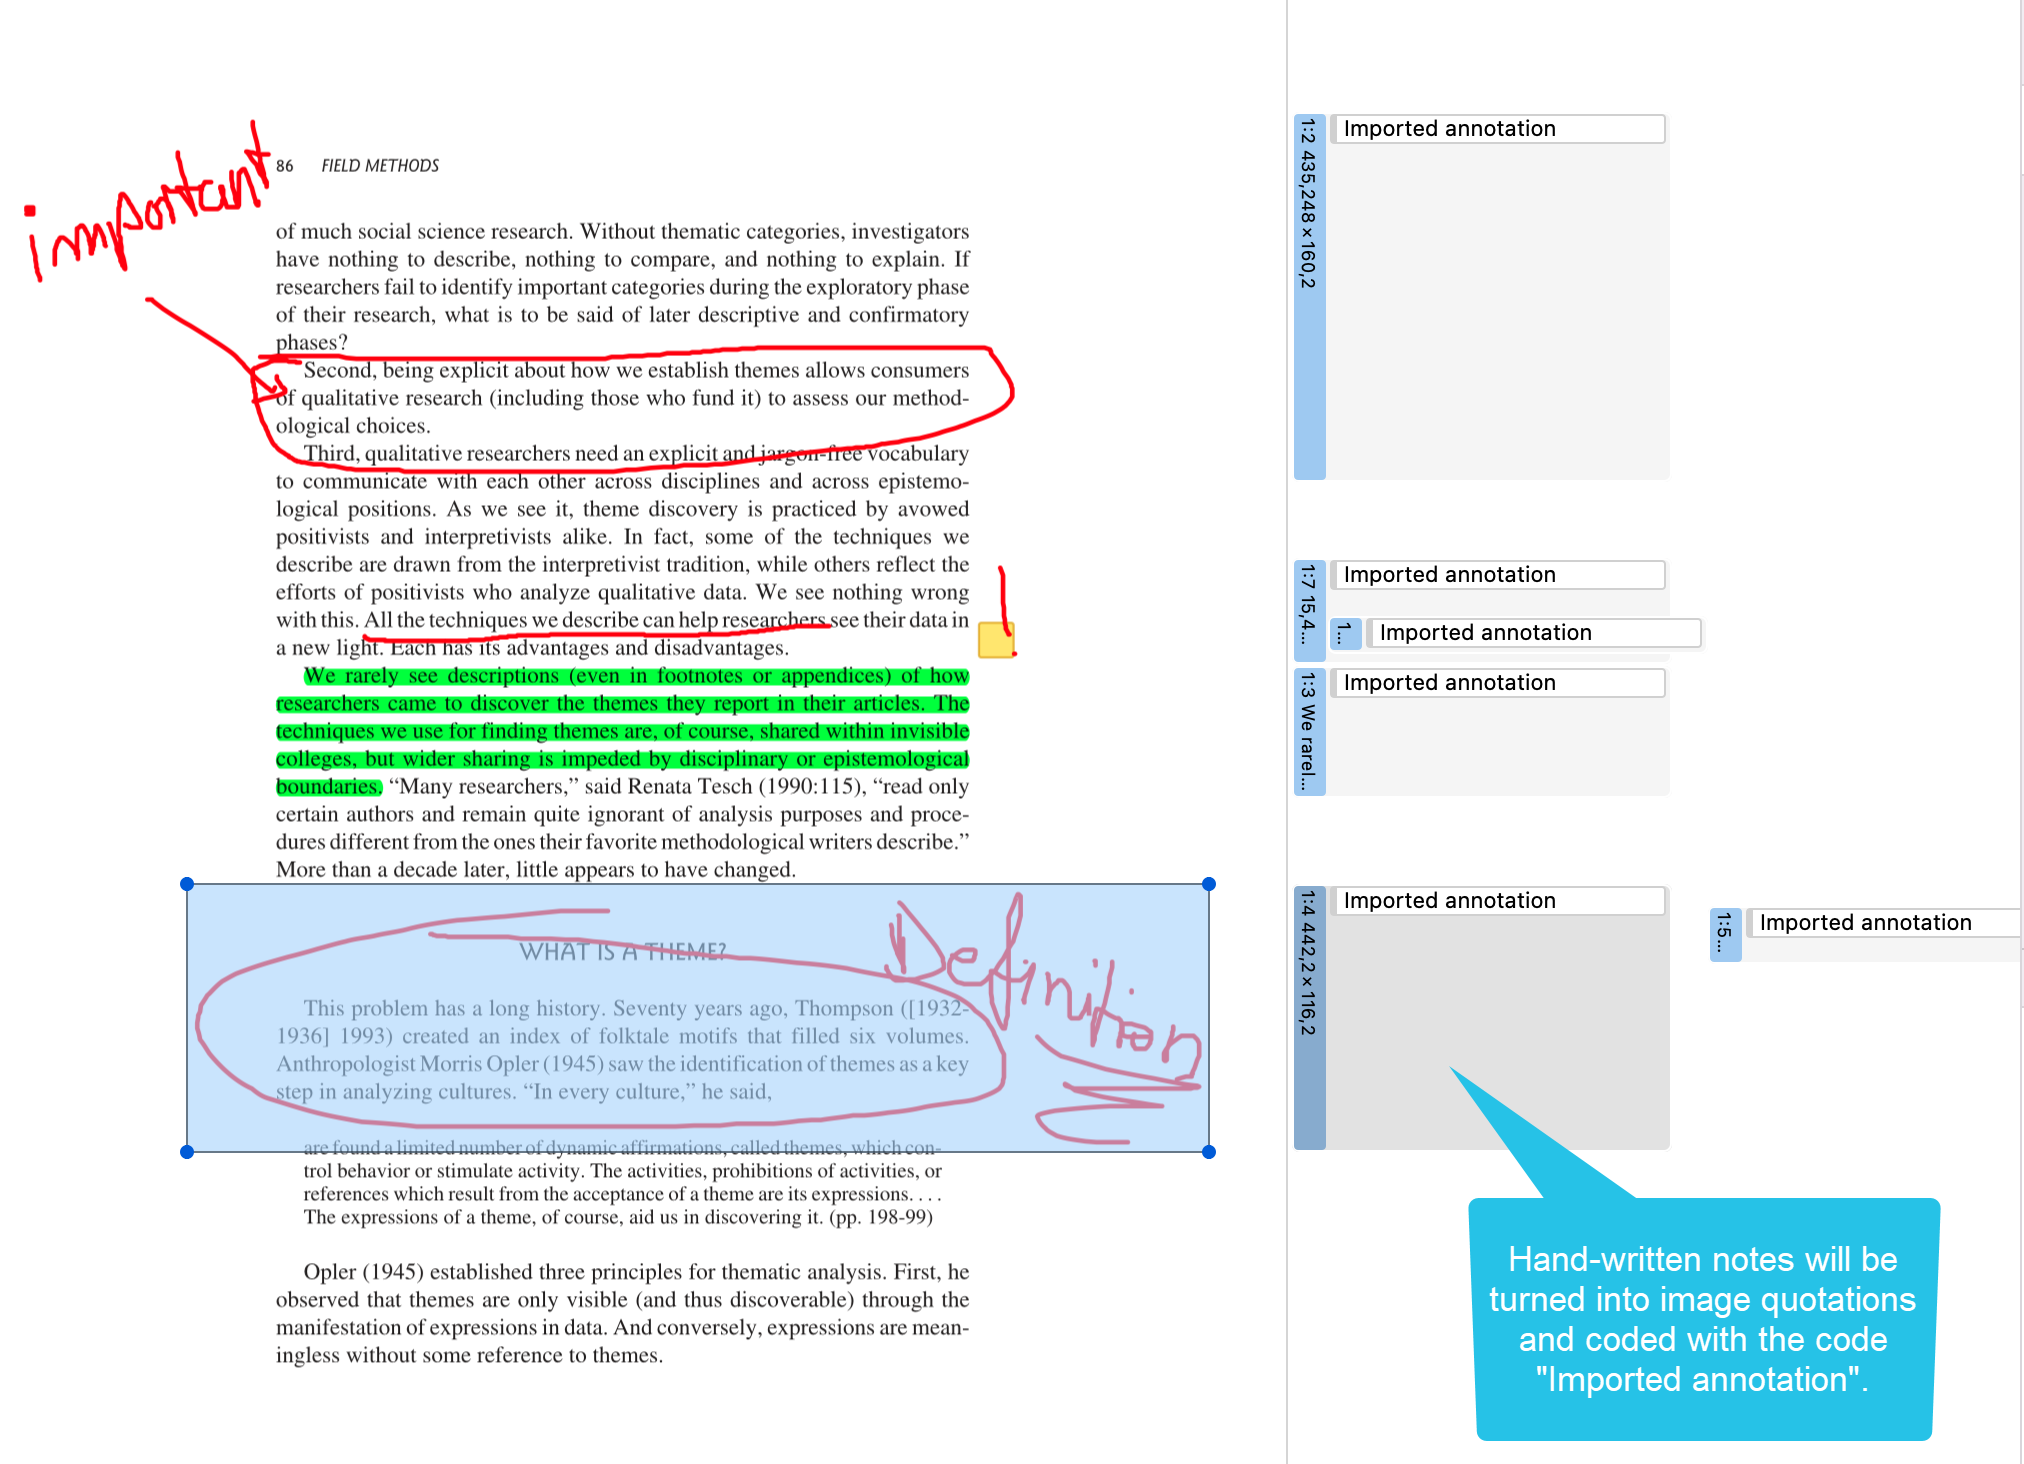 Imported PDF documents with handwritten annotations